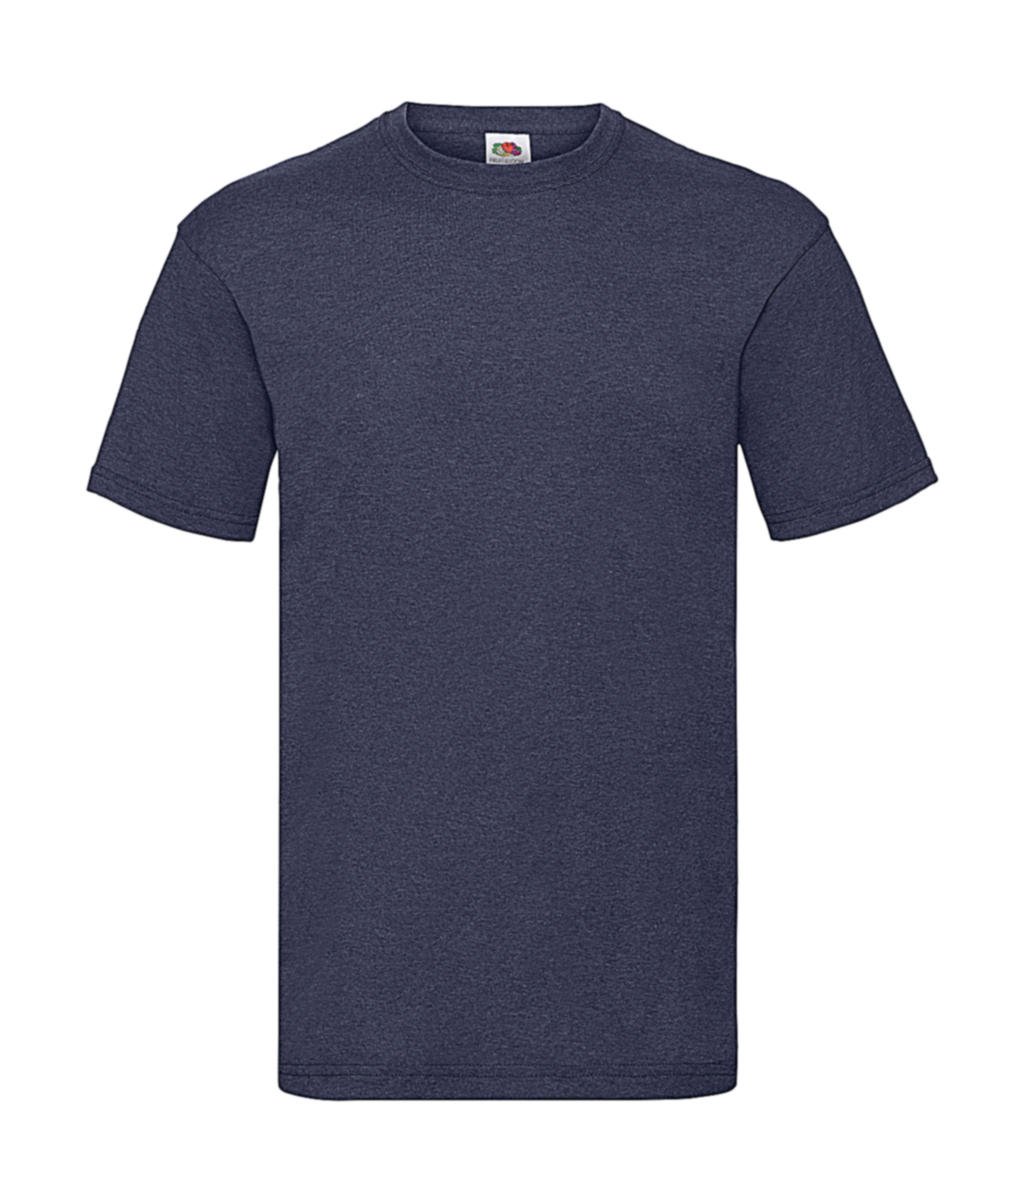  Valueweight Tee in Farbe Heather Navy